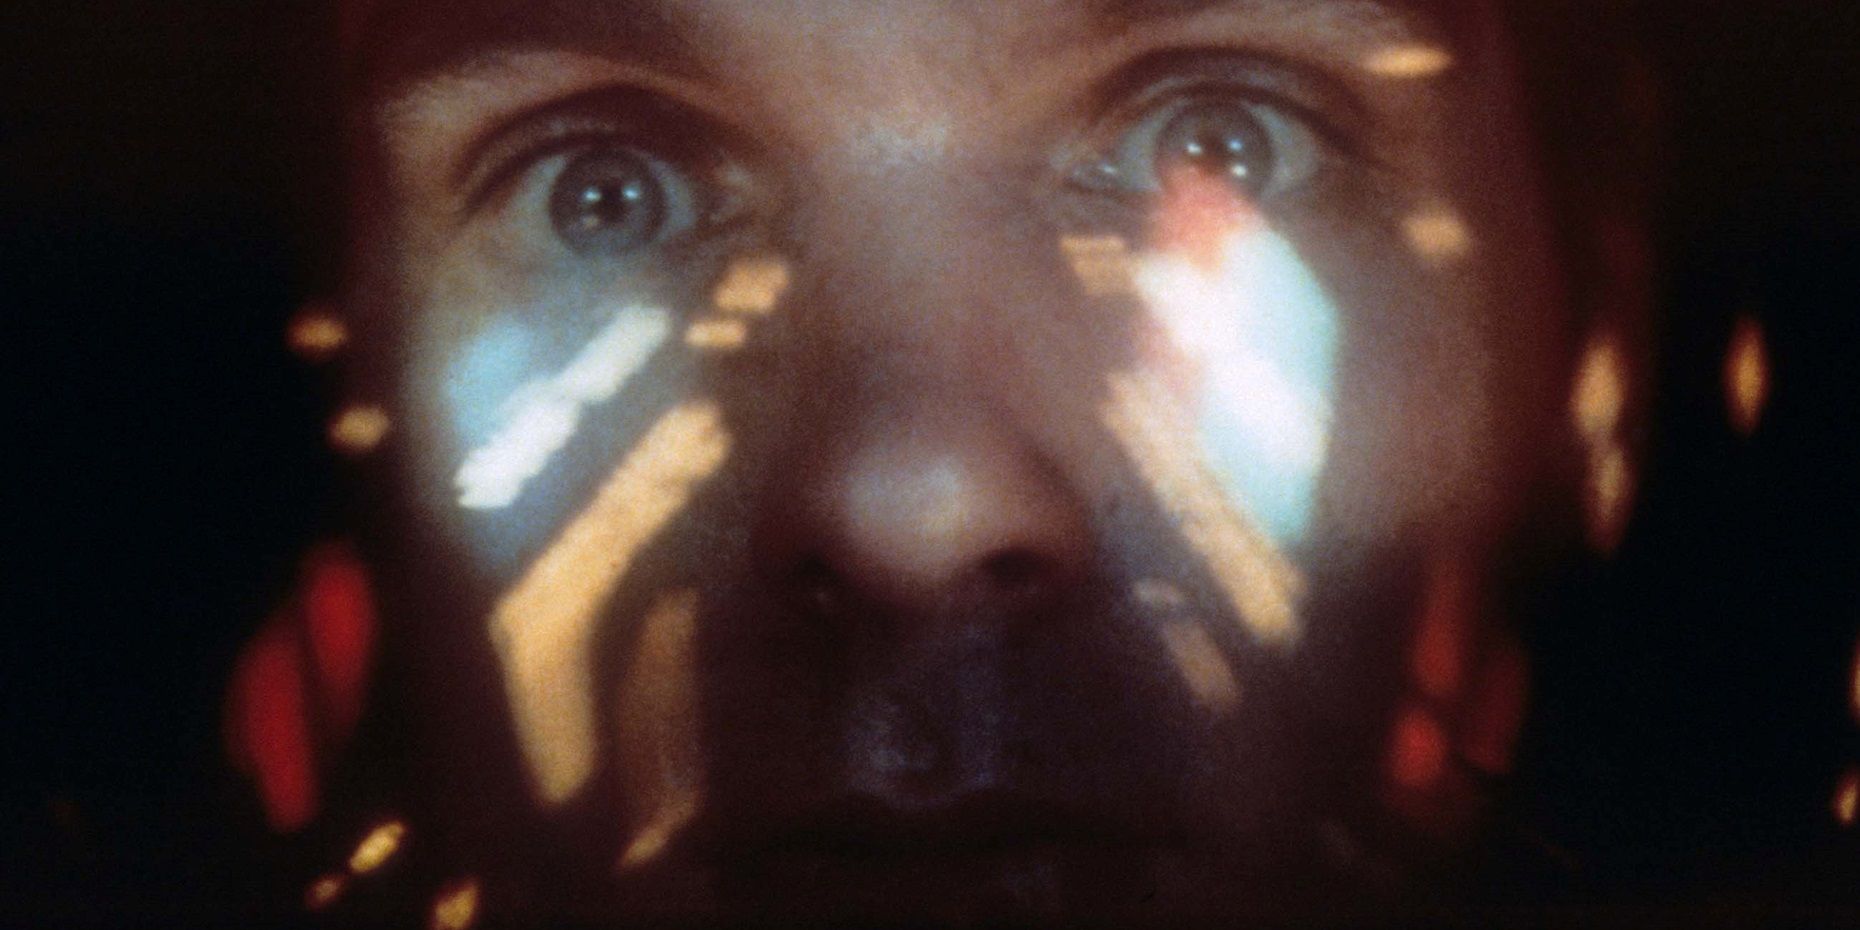 Dave_in_the_Star_Gate_in_2001_A_Space_Odyssey